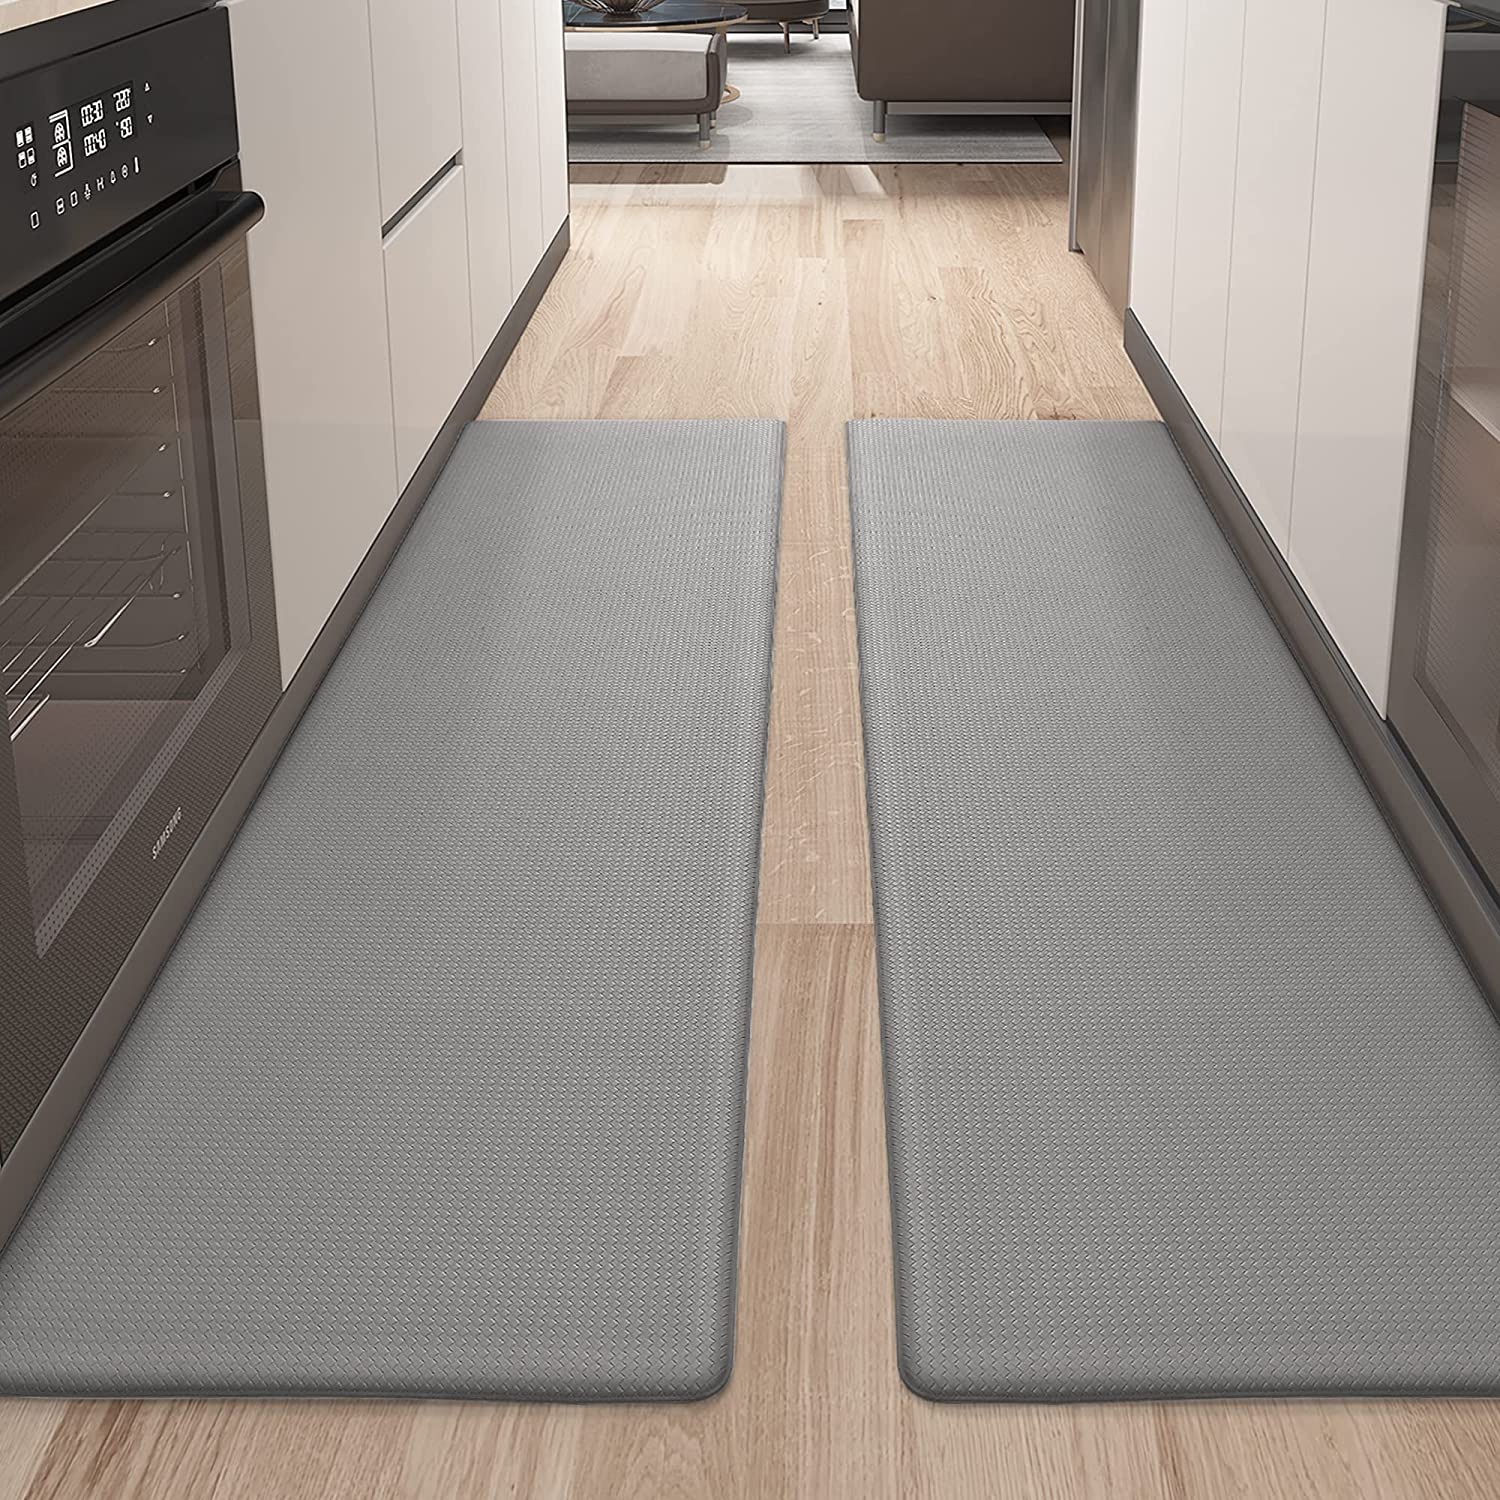 Kitchen Mats and Rugs Set of 2 - Kitchen Floor Mat Cushioned Anti